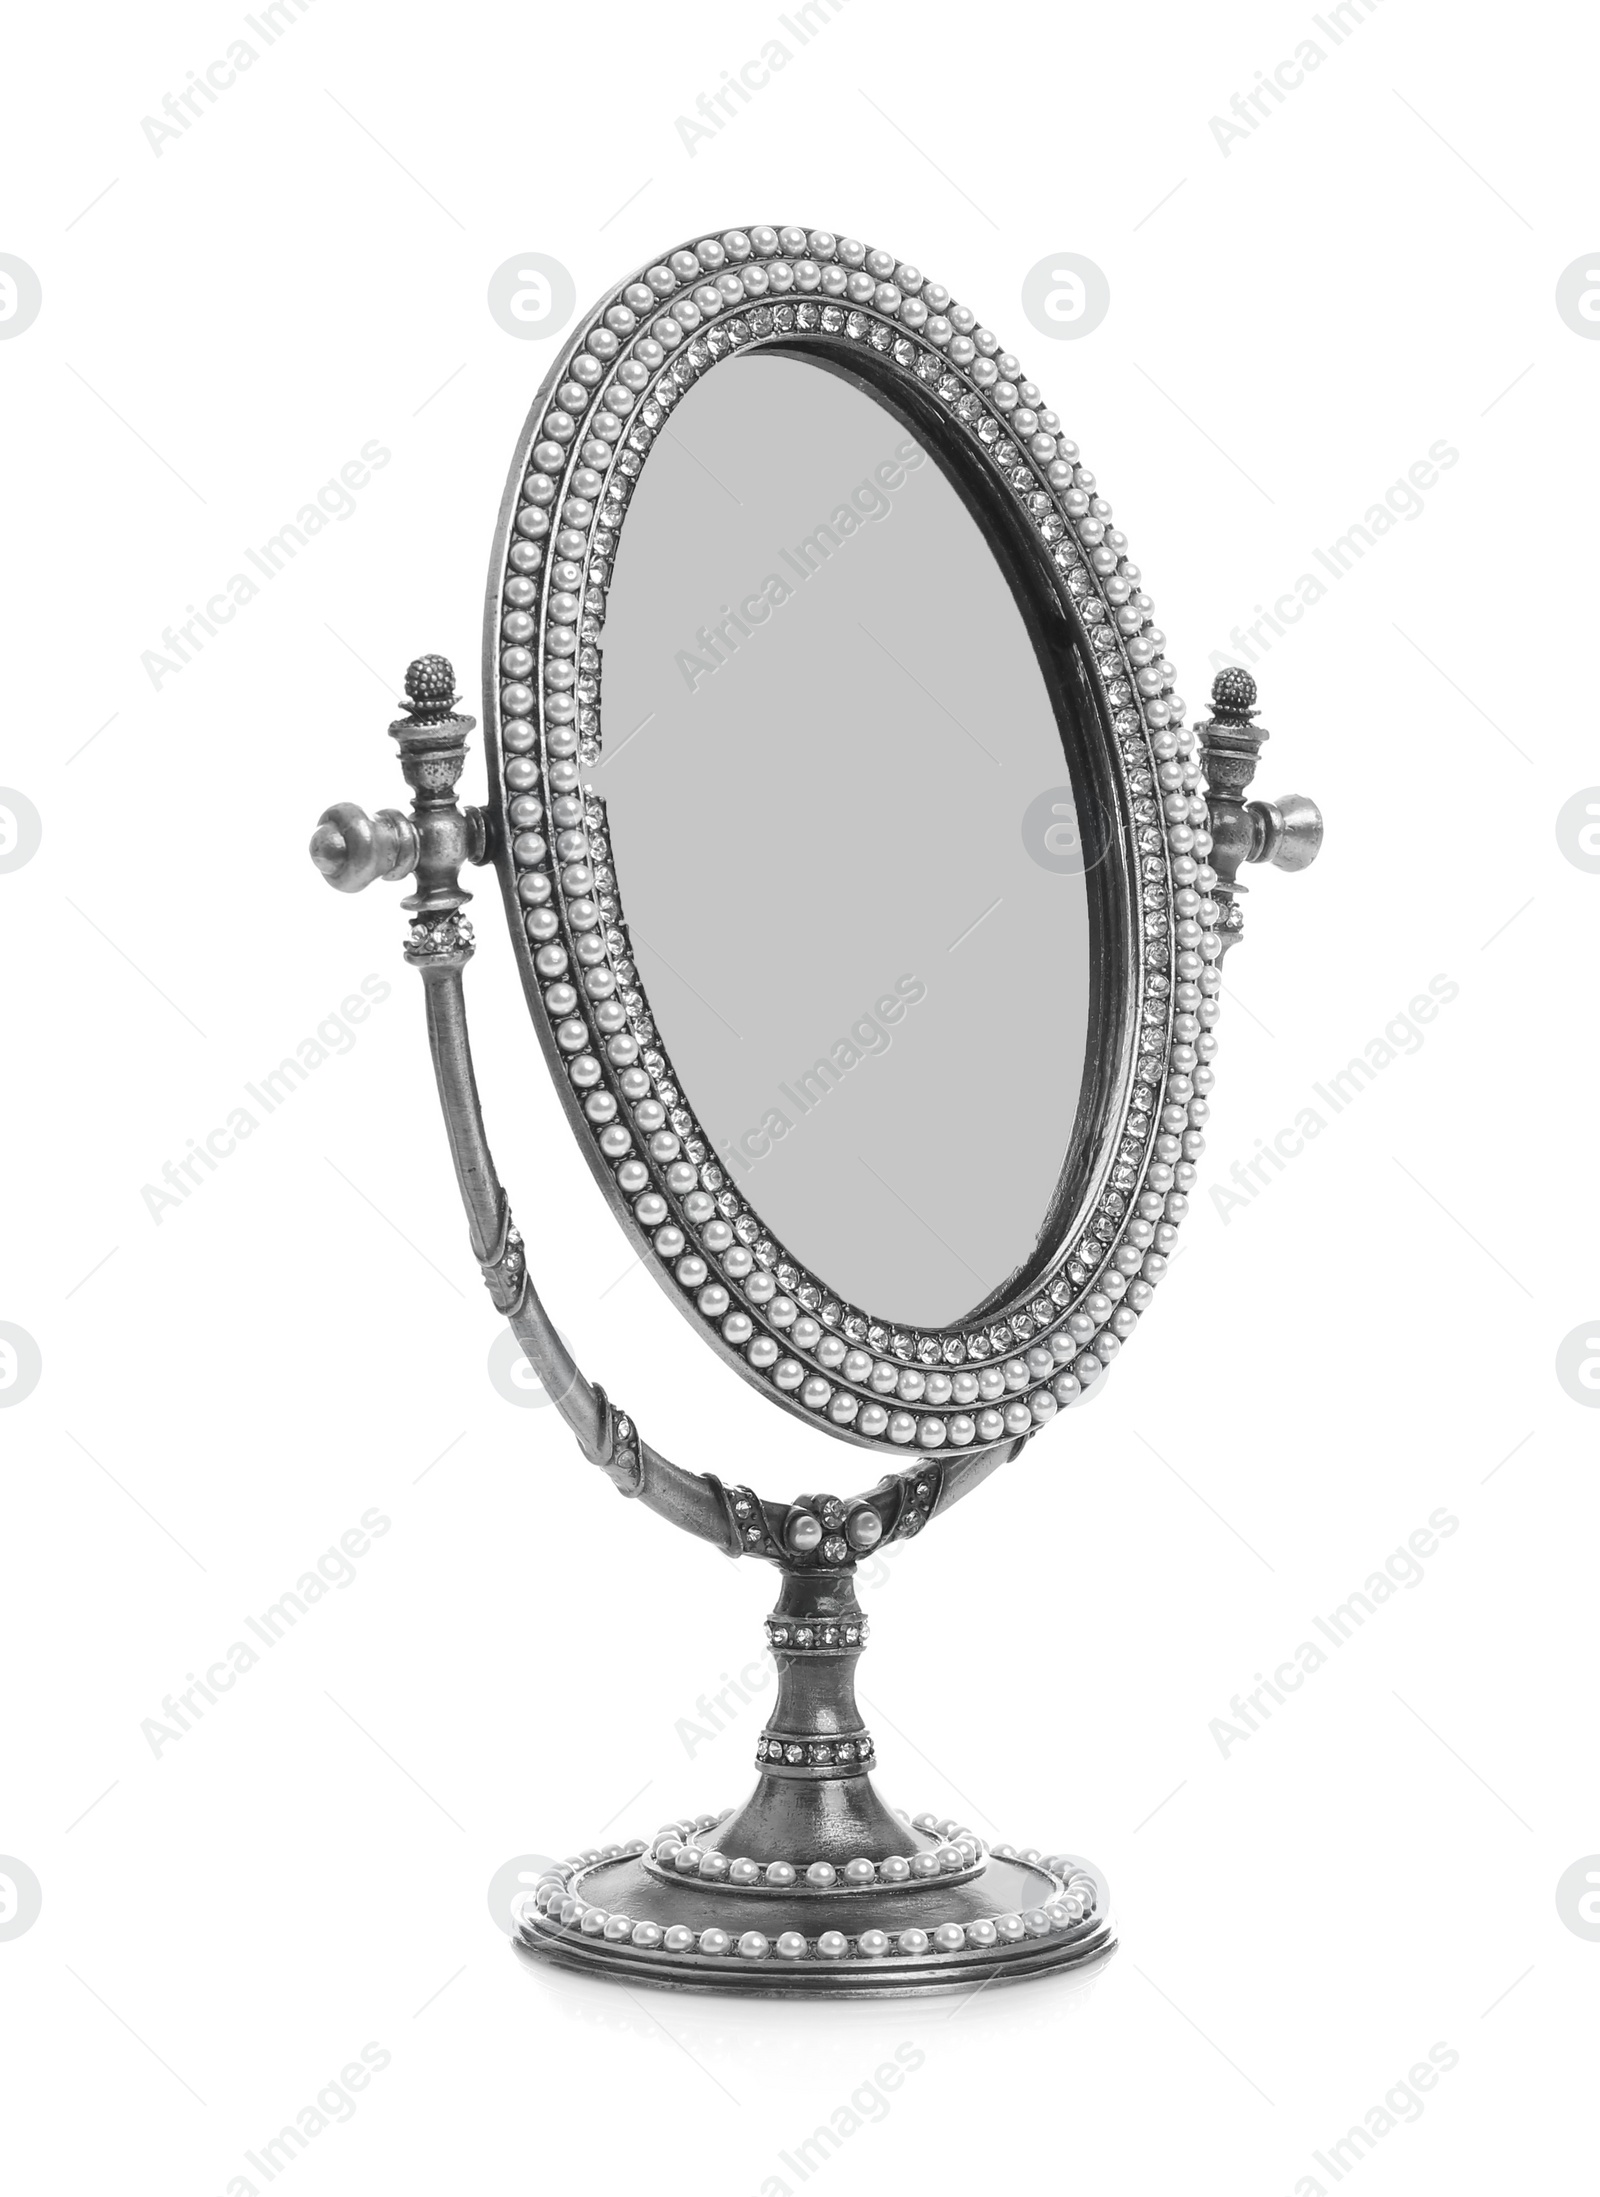 Photo of Vintage desk mirror with stand isolated on white